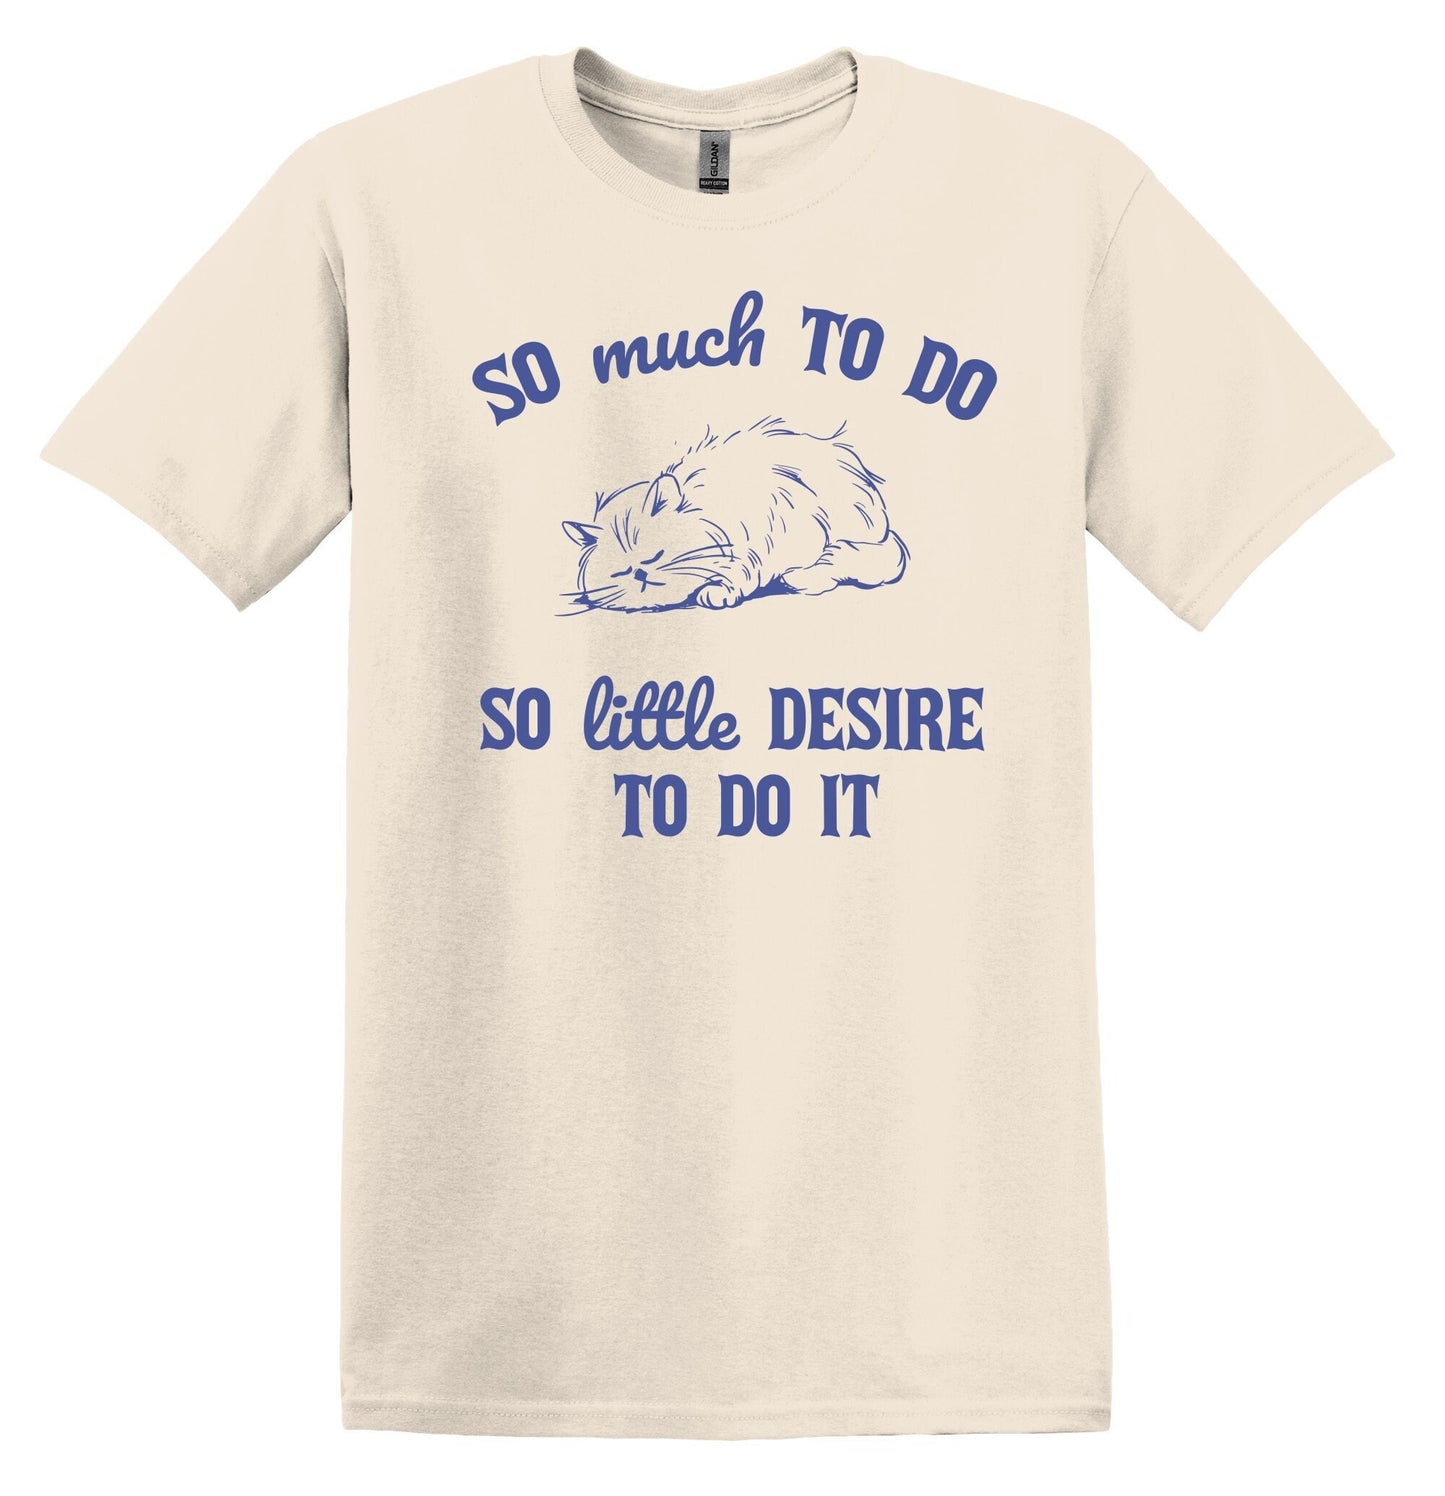 So Much to Do So Little Desire to Do It Shirt Graphic Shirt Funny Adult TShirt Vintage Funny TShirt Nostalgia T-Shirt Relaxed Cotton Shirt